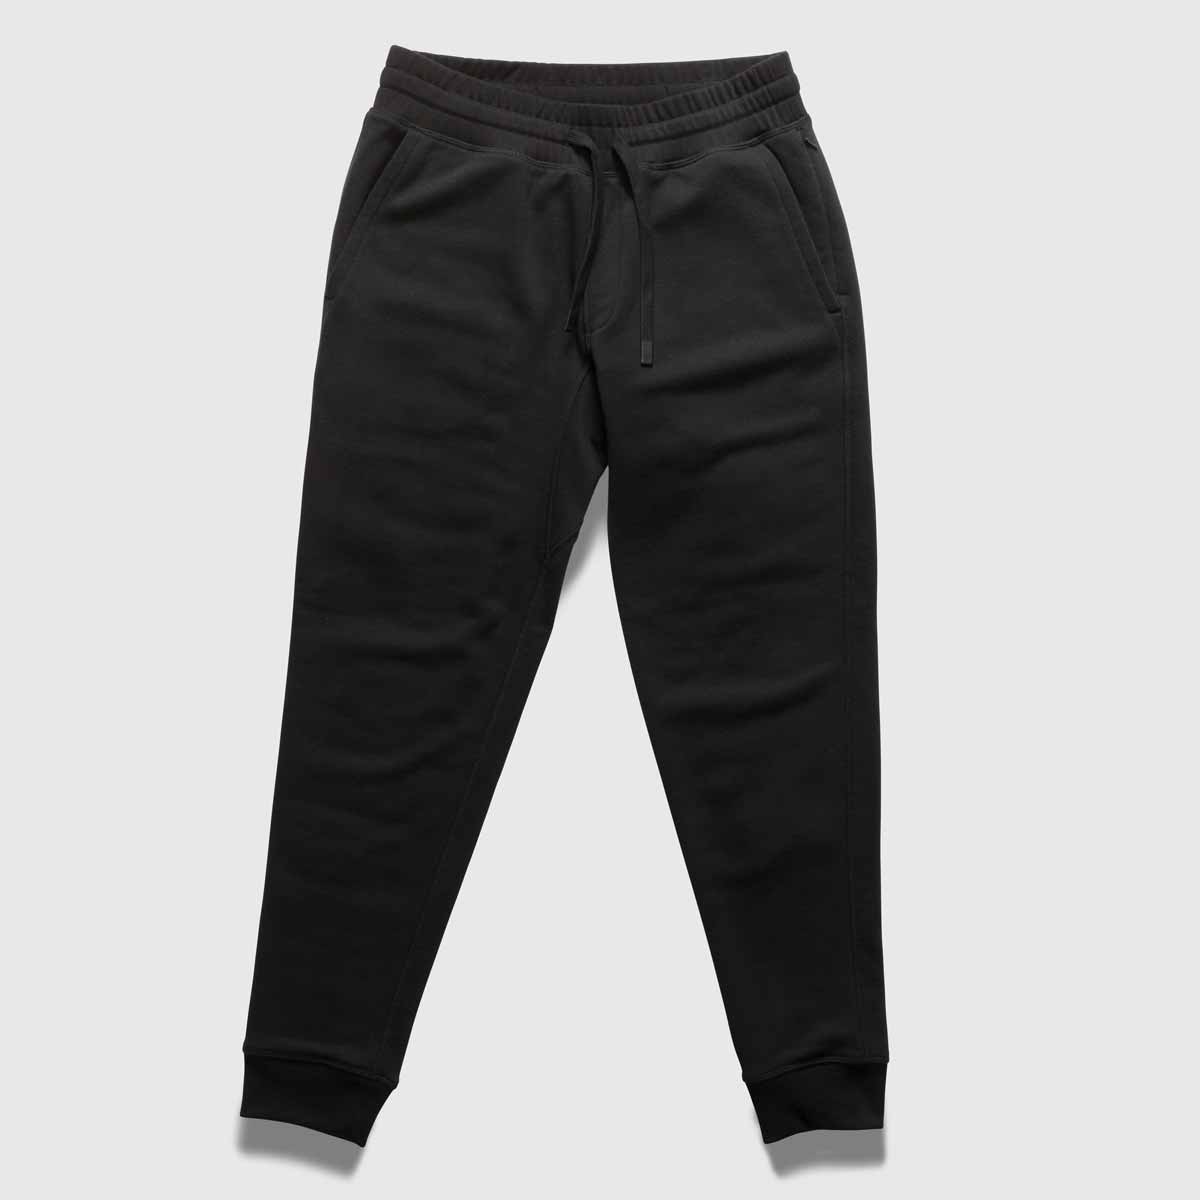 Men's Jogger Sweatpants, Sustainably-Made